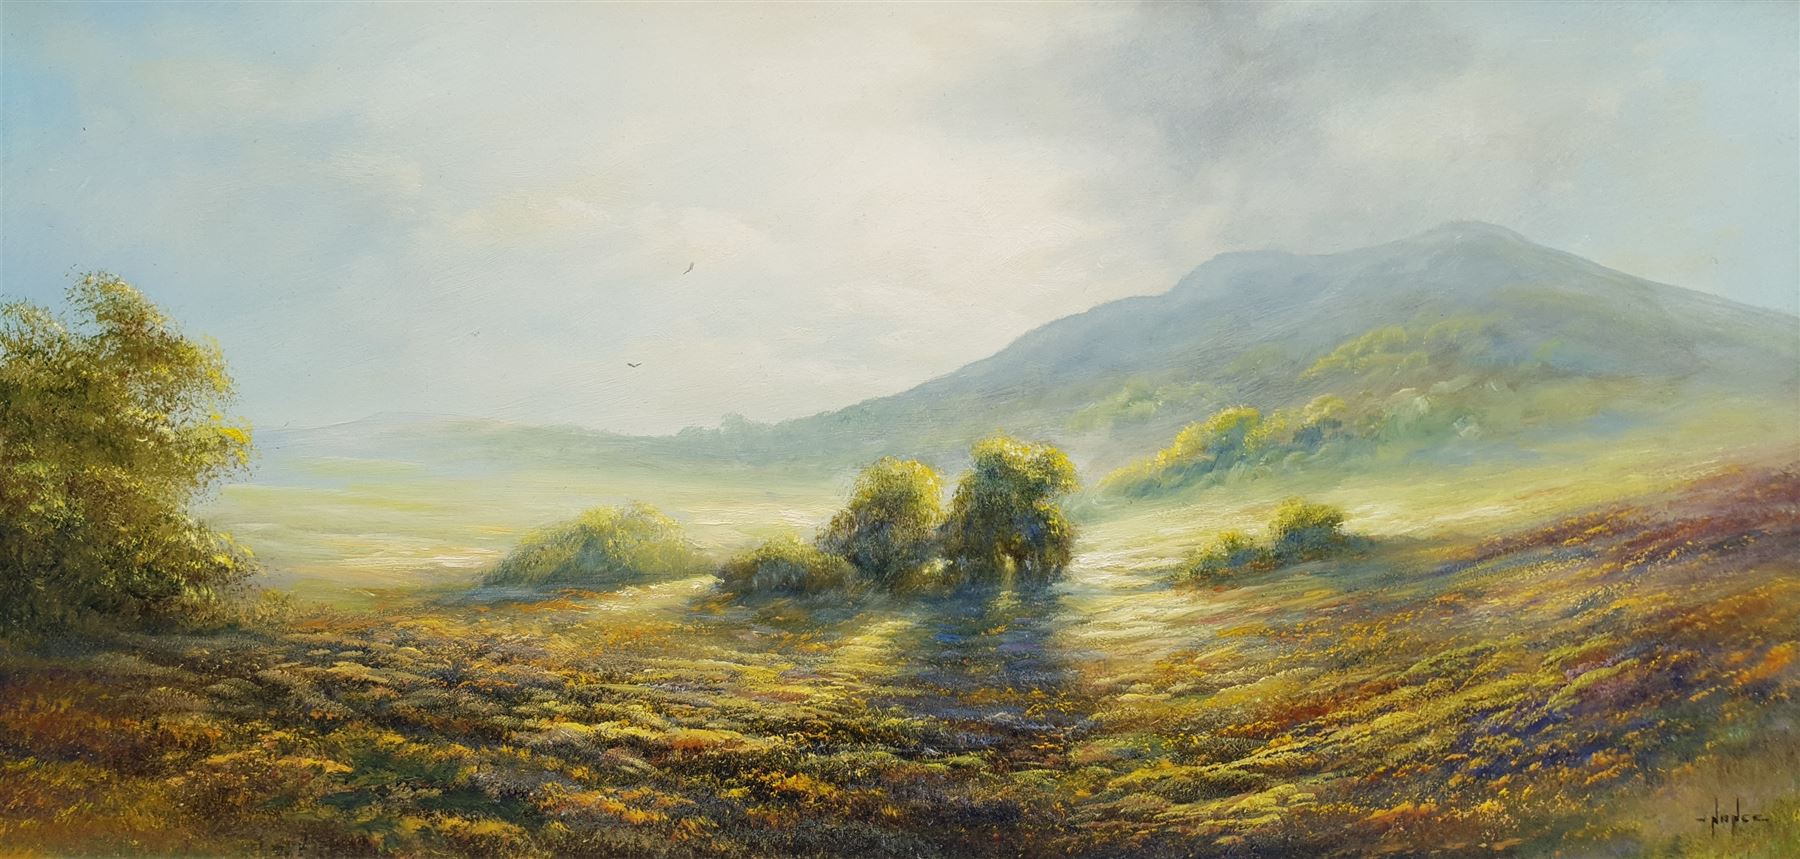 Mike Nance (British Contemporary): Morning Mist